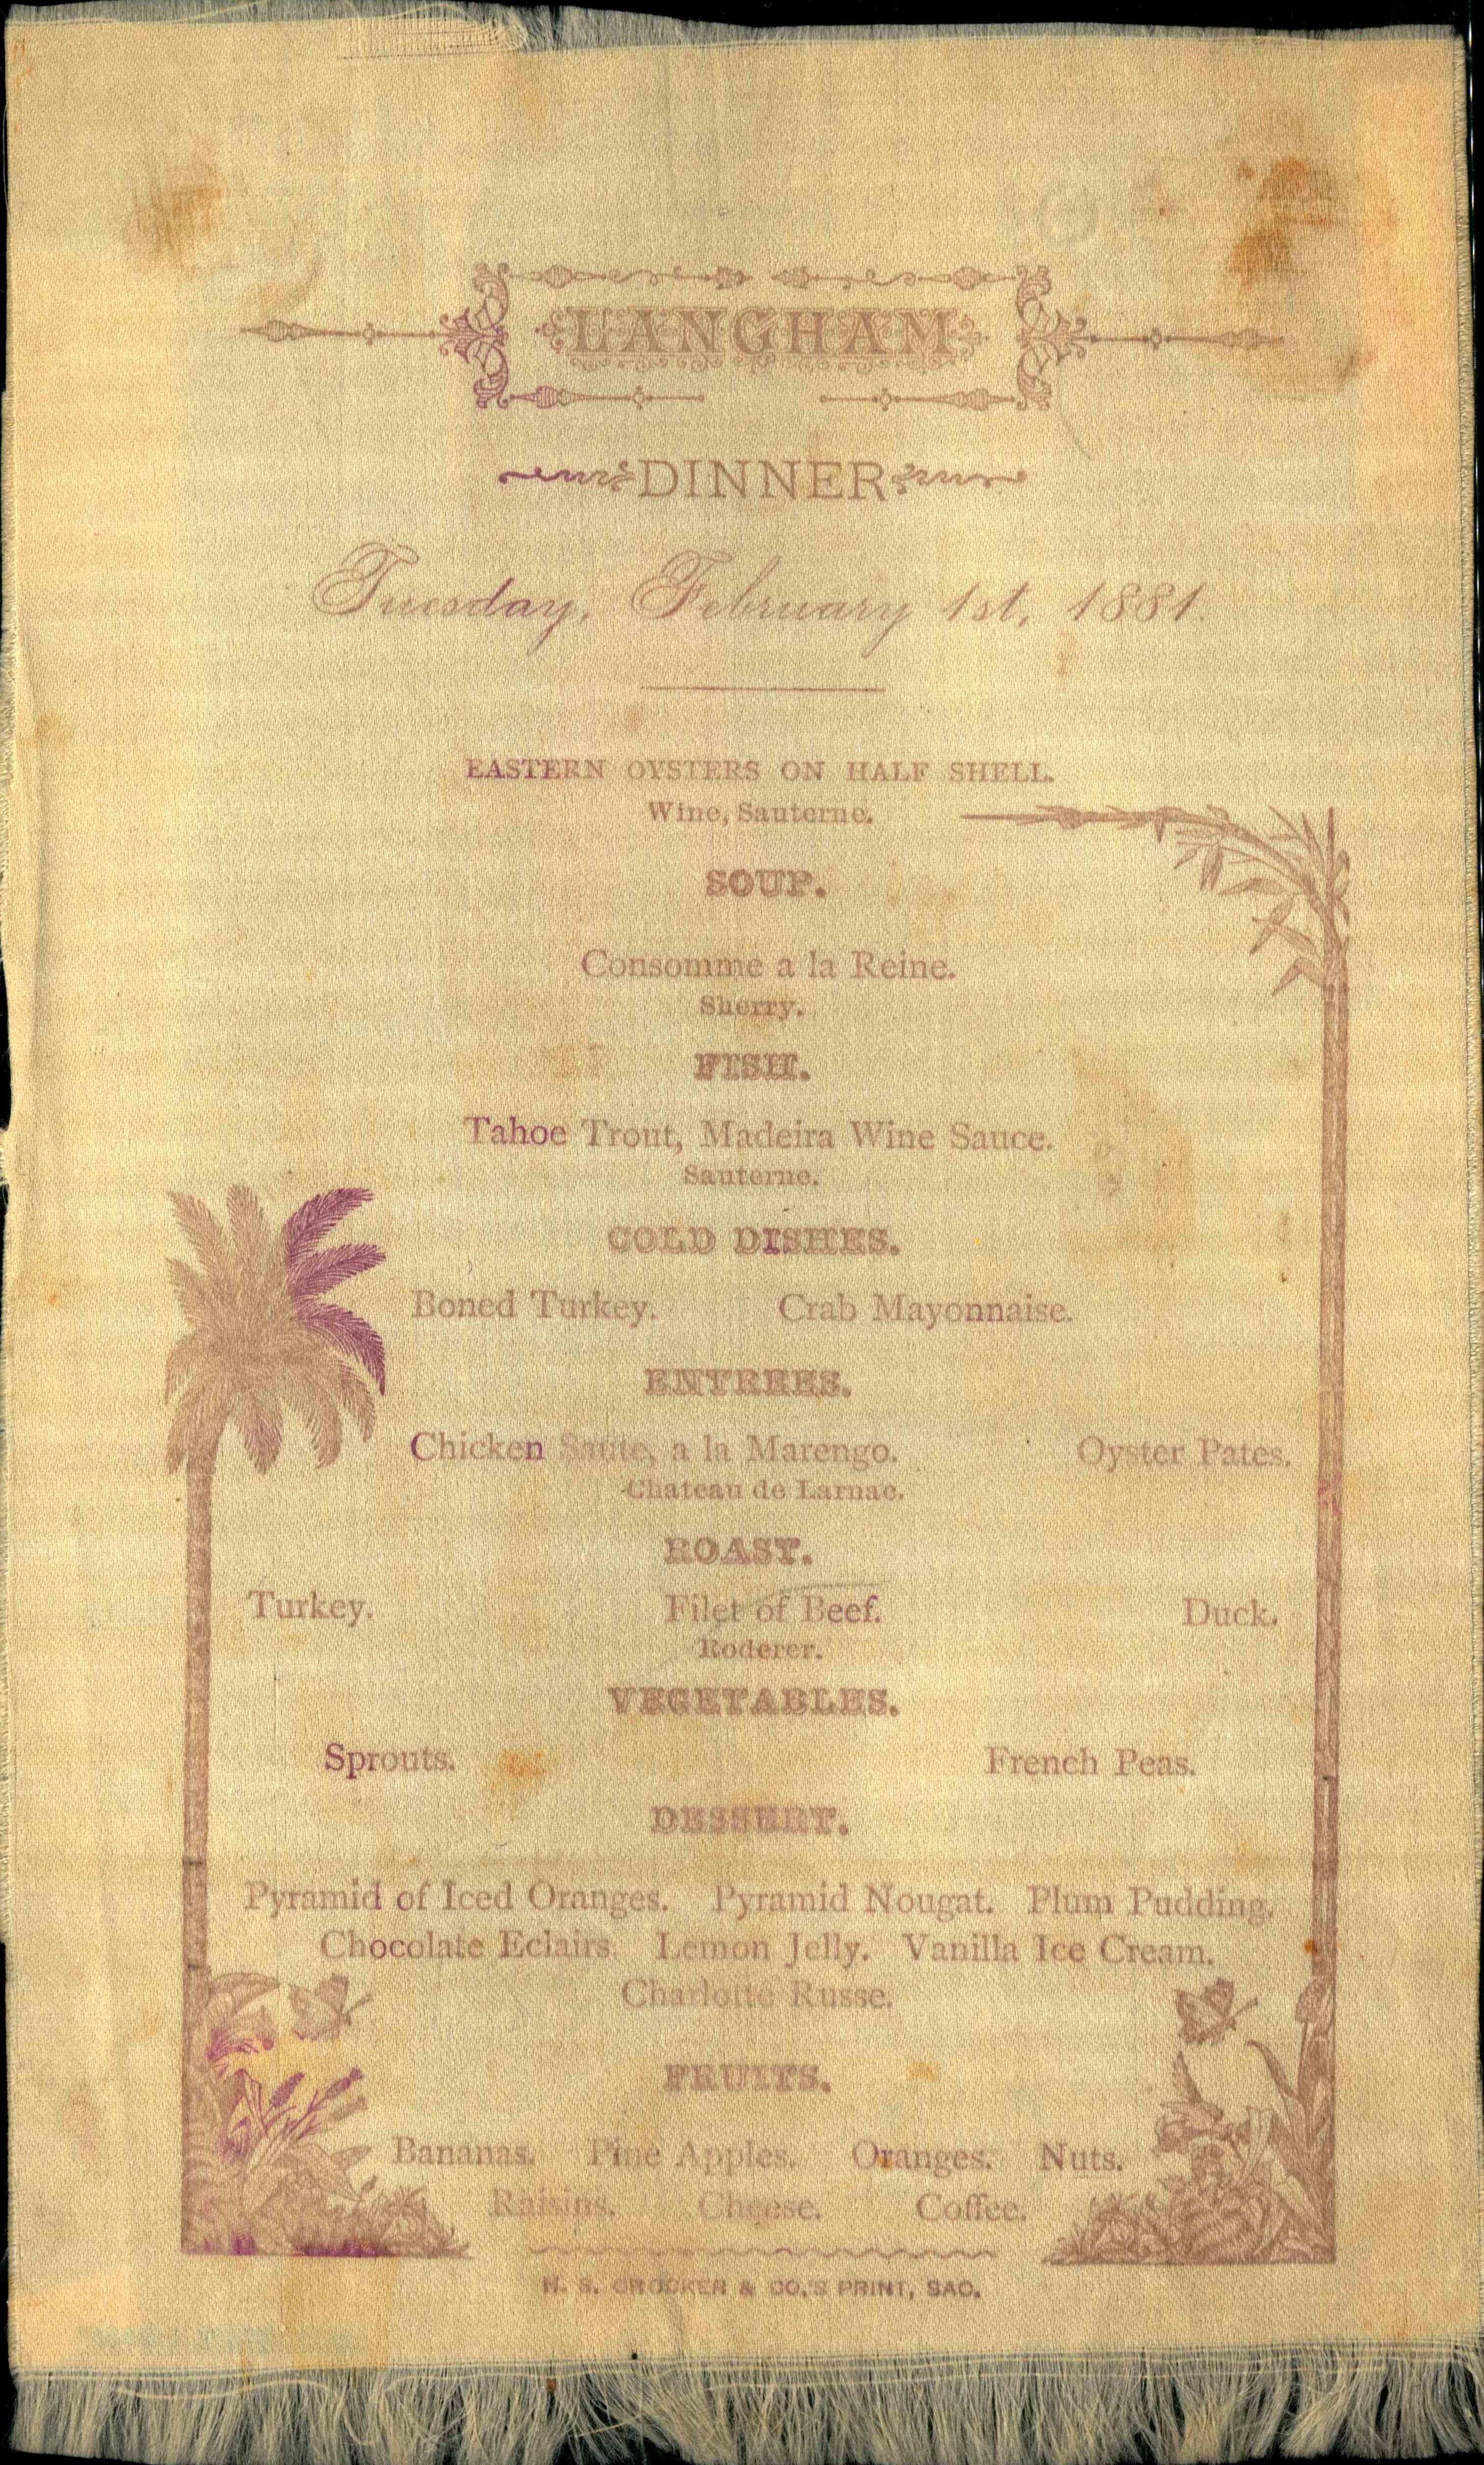 Palm trees, and flower on the bottom of the menu